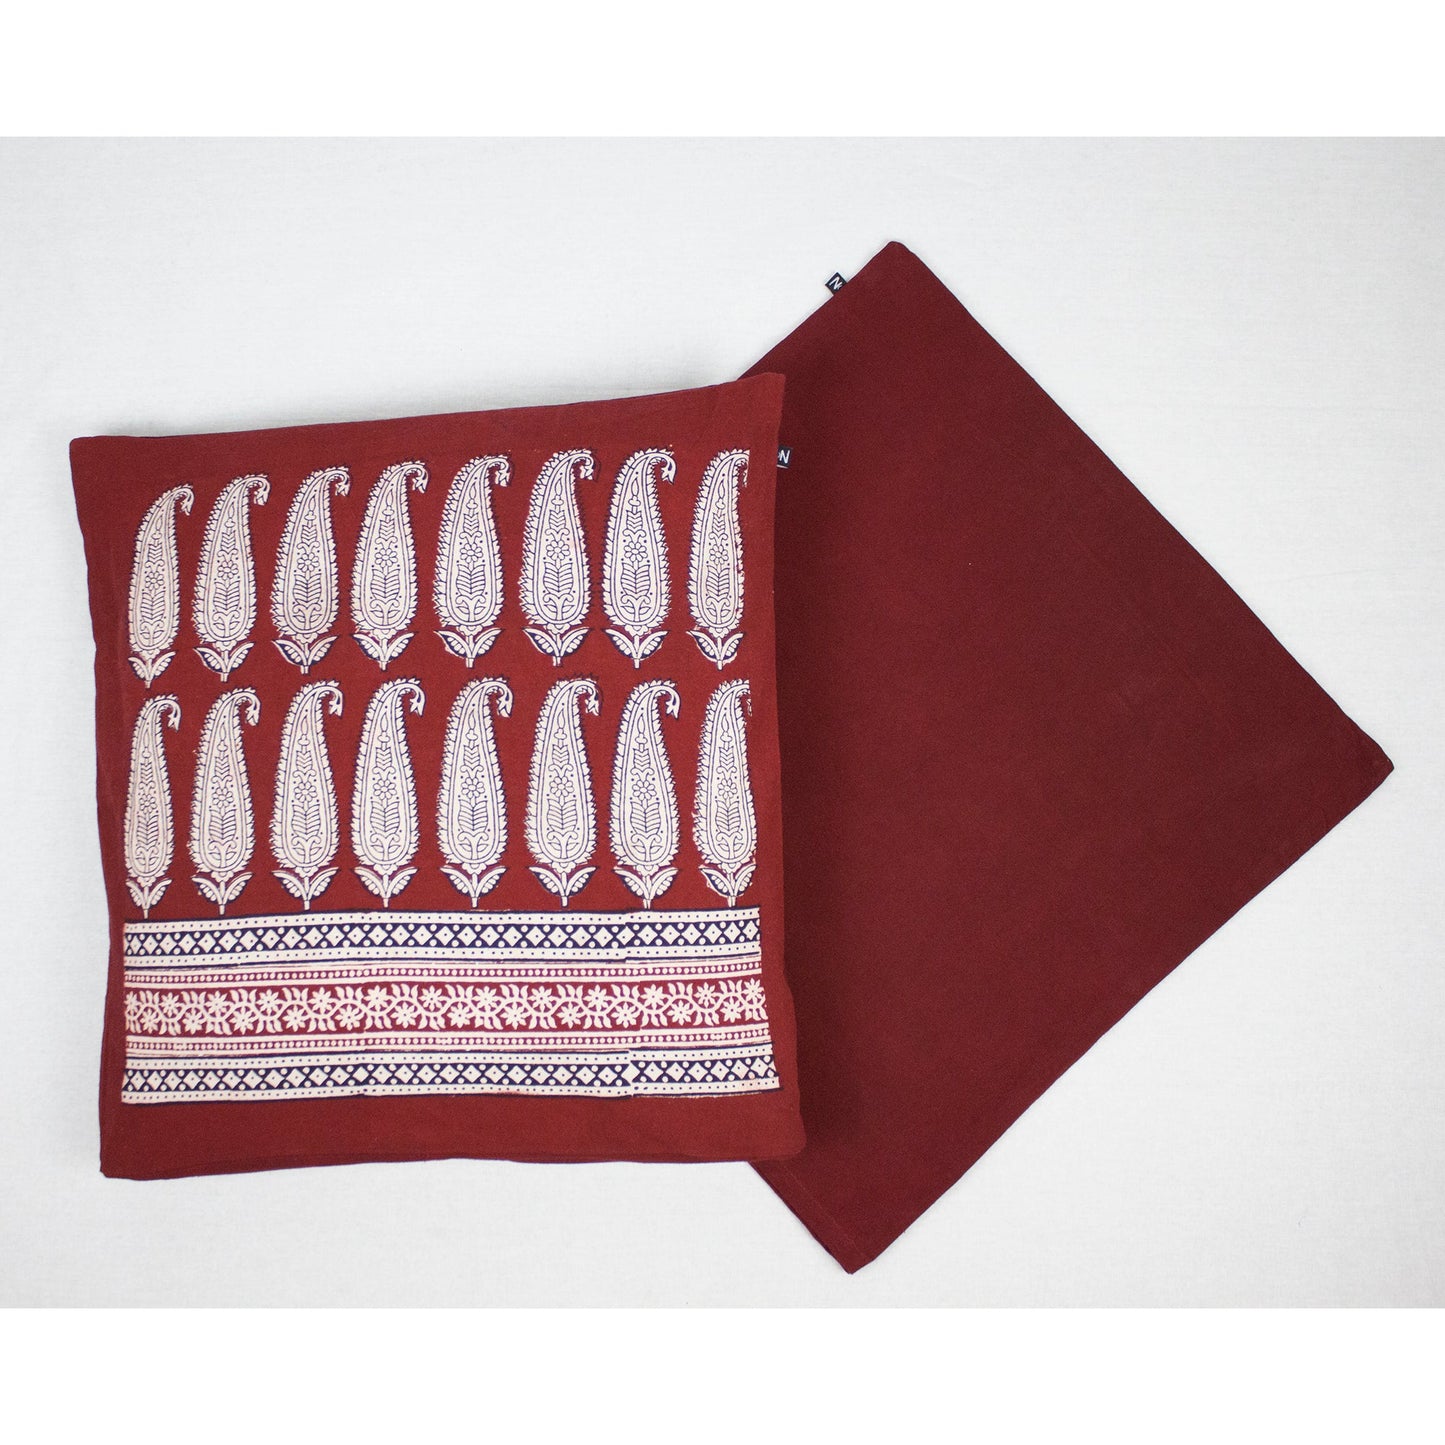 Long Paisley Bagh Hand Block Print Cotton Cushion Cover - Red-1